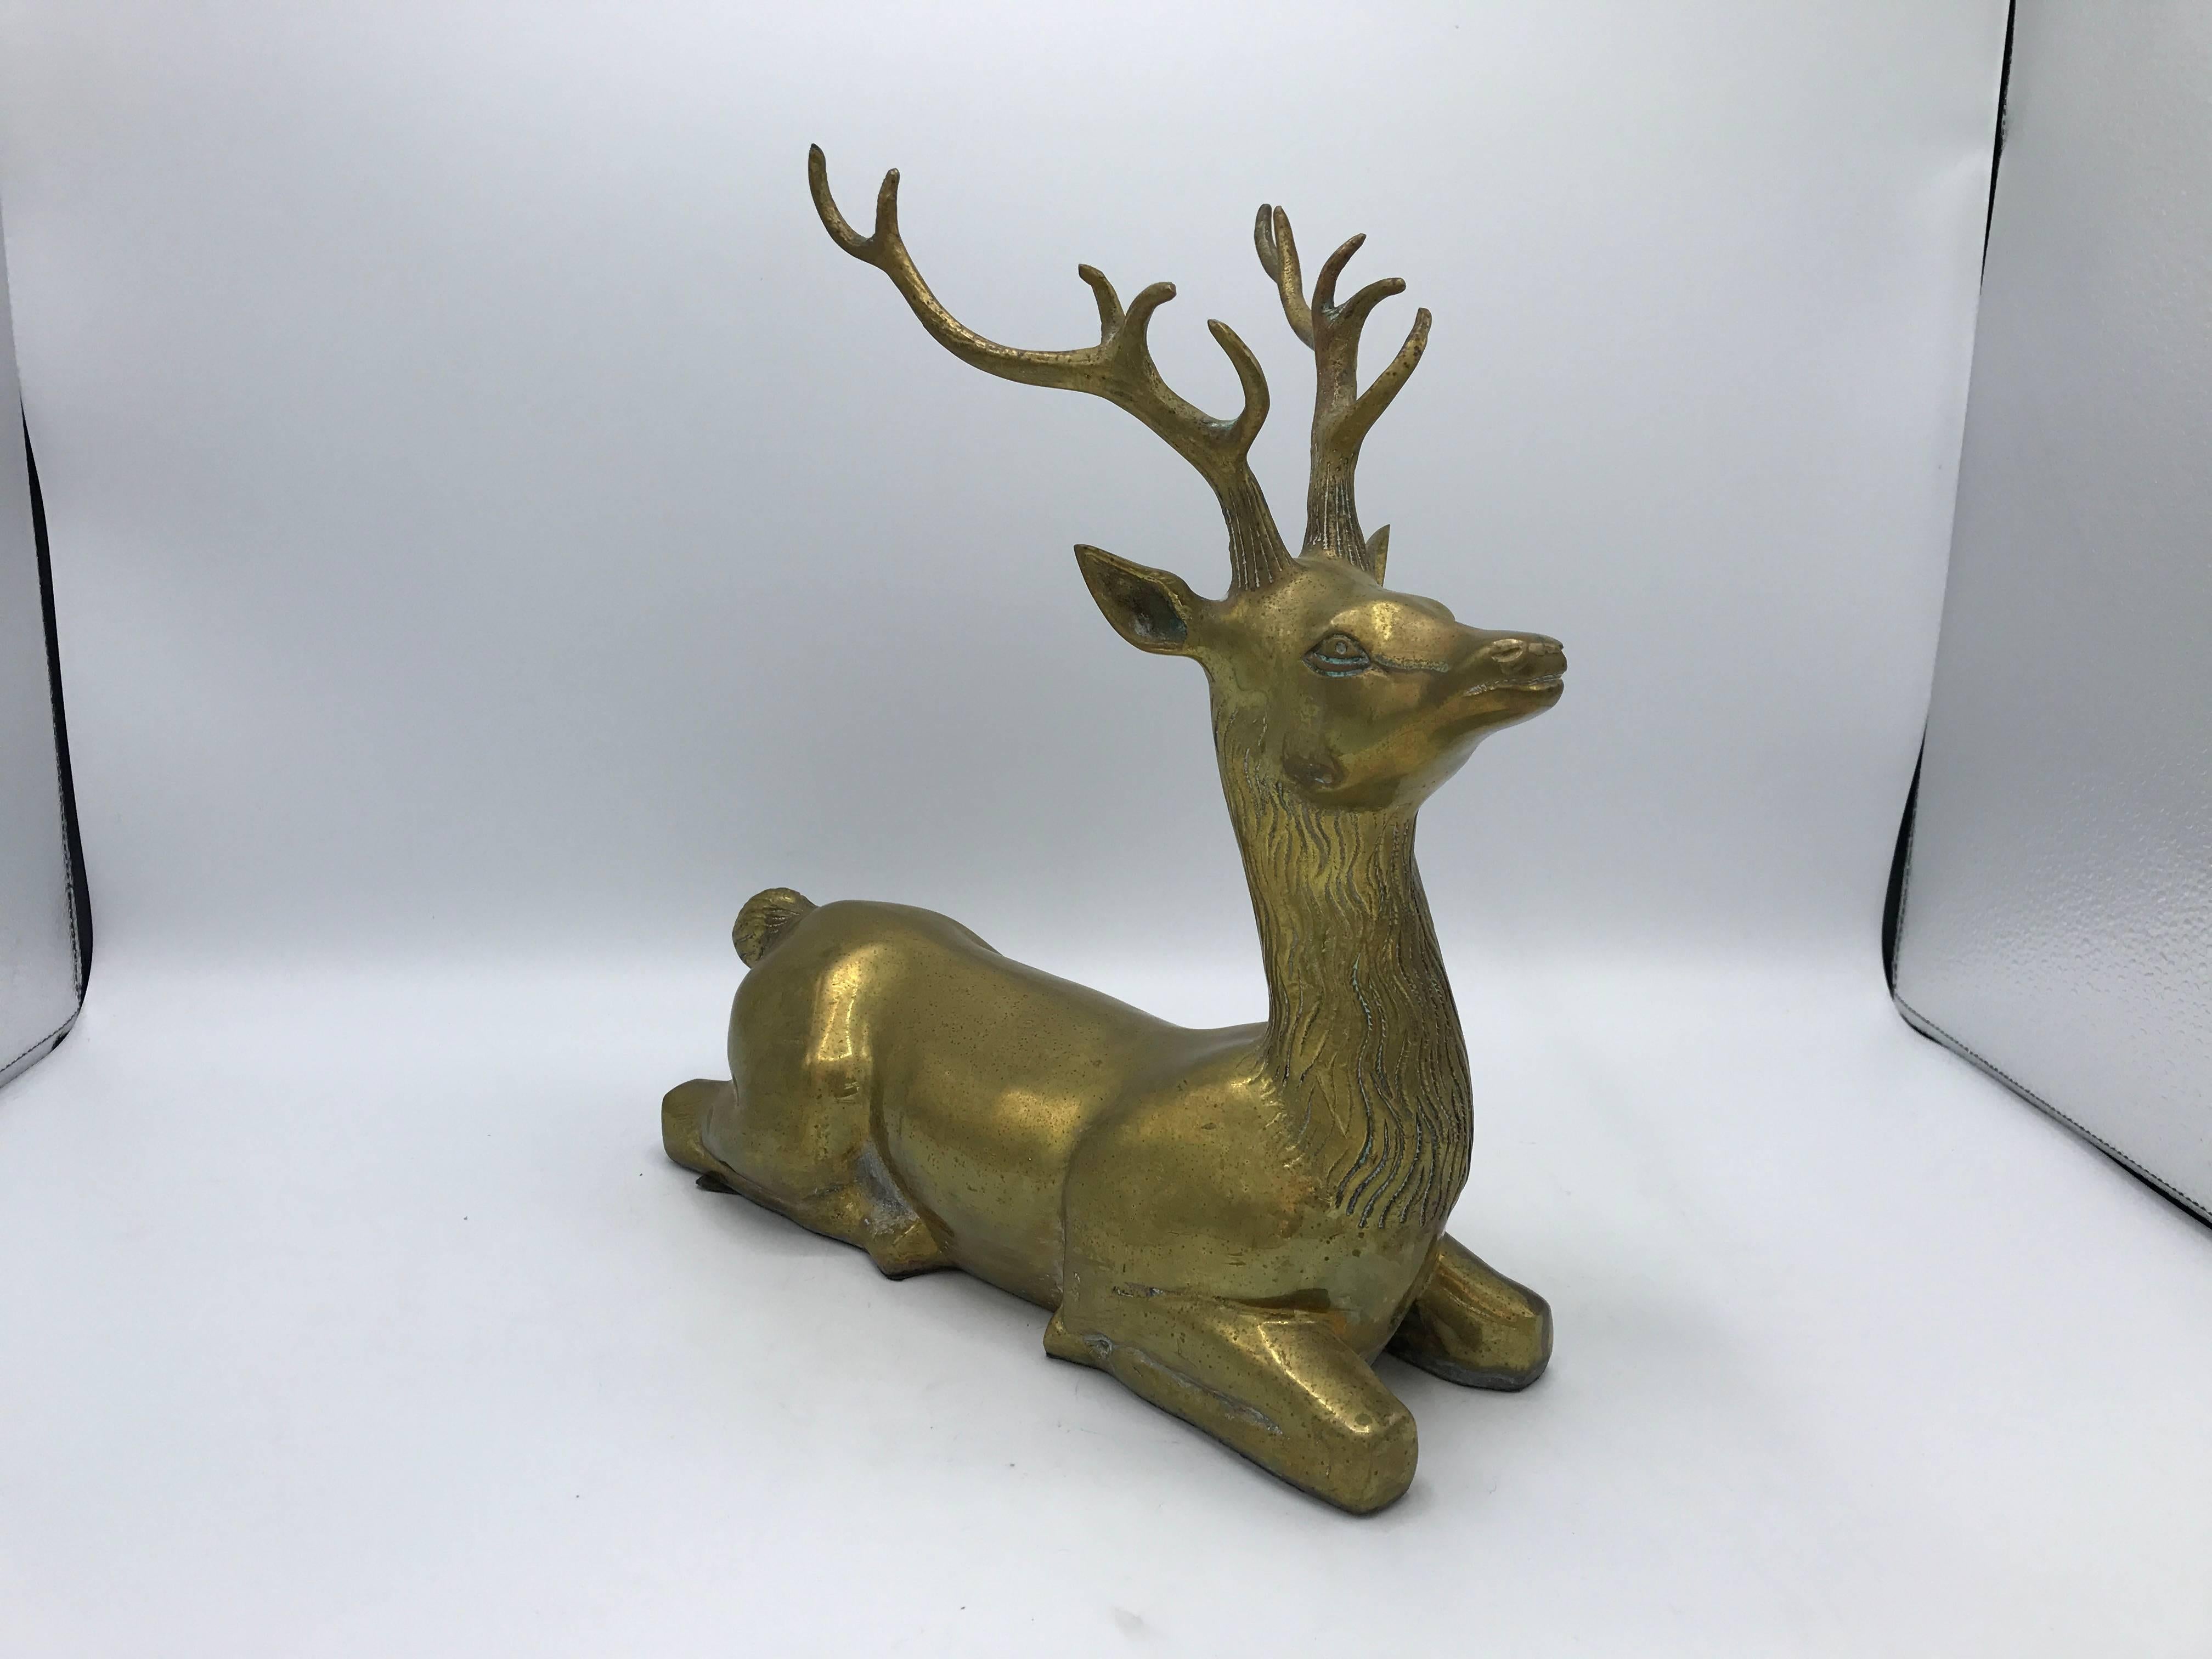 Offered is a beautiful, 1960s brass seated deer sculpture.